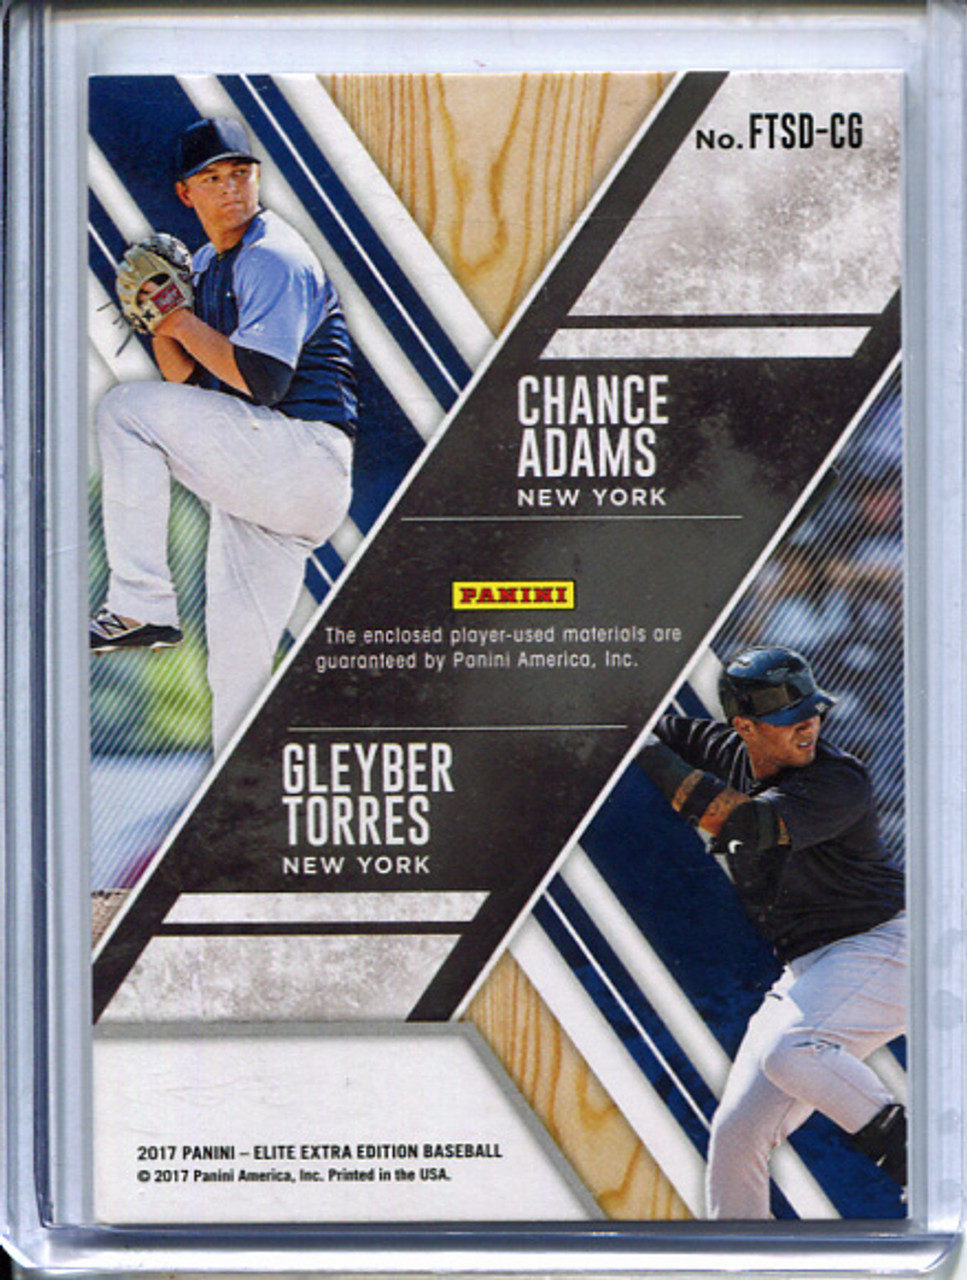 Gleyber Torres, Chance Adams 2017 Elite Extra Edition, Future Threads Dual Silhouettes #FTSD-CG (#013/221)